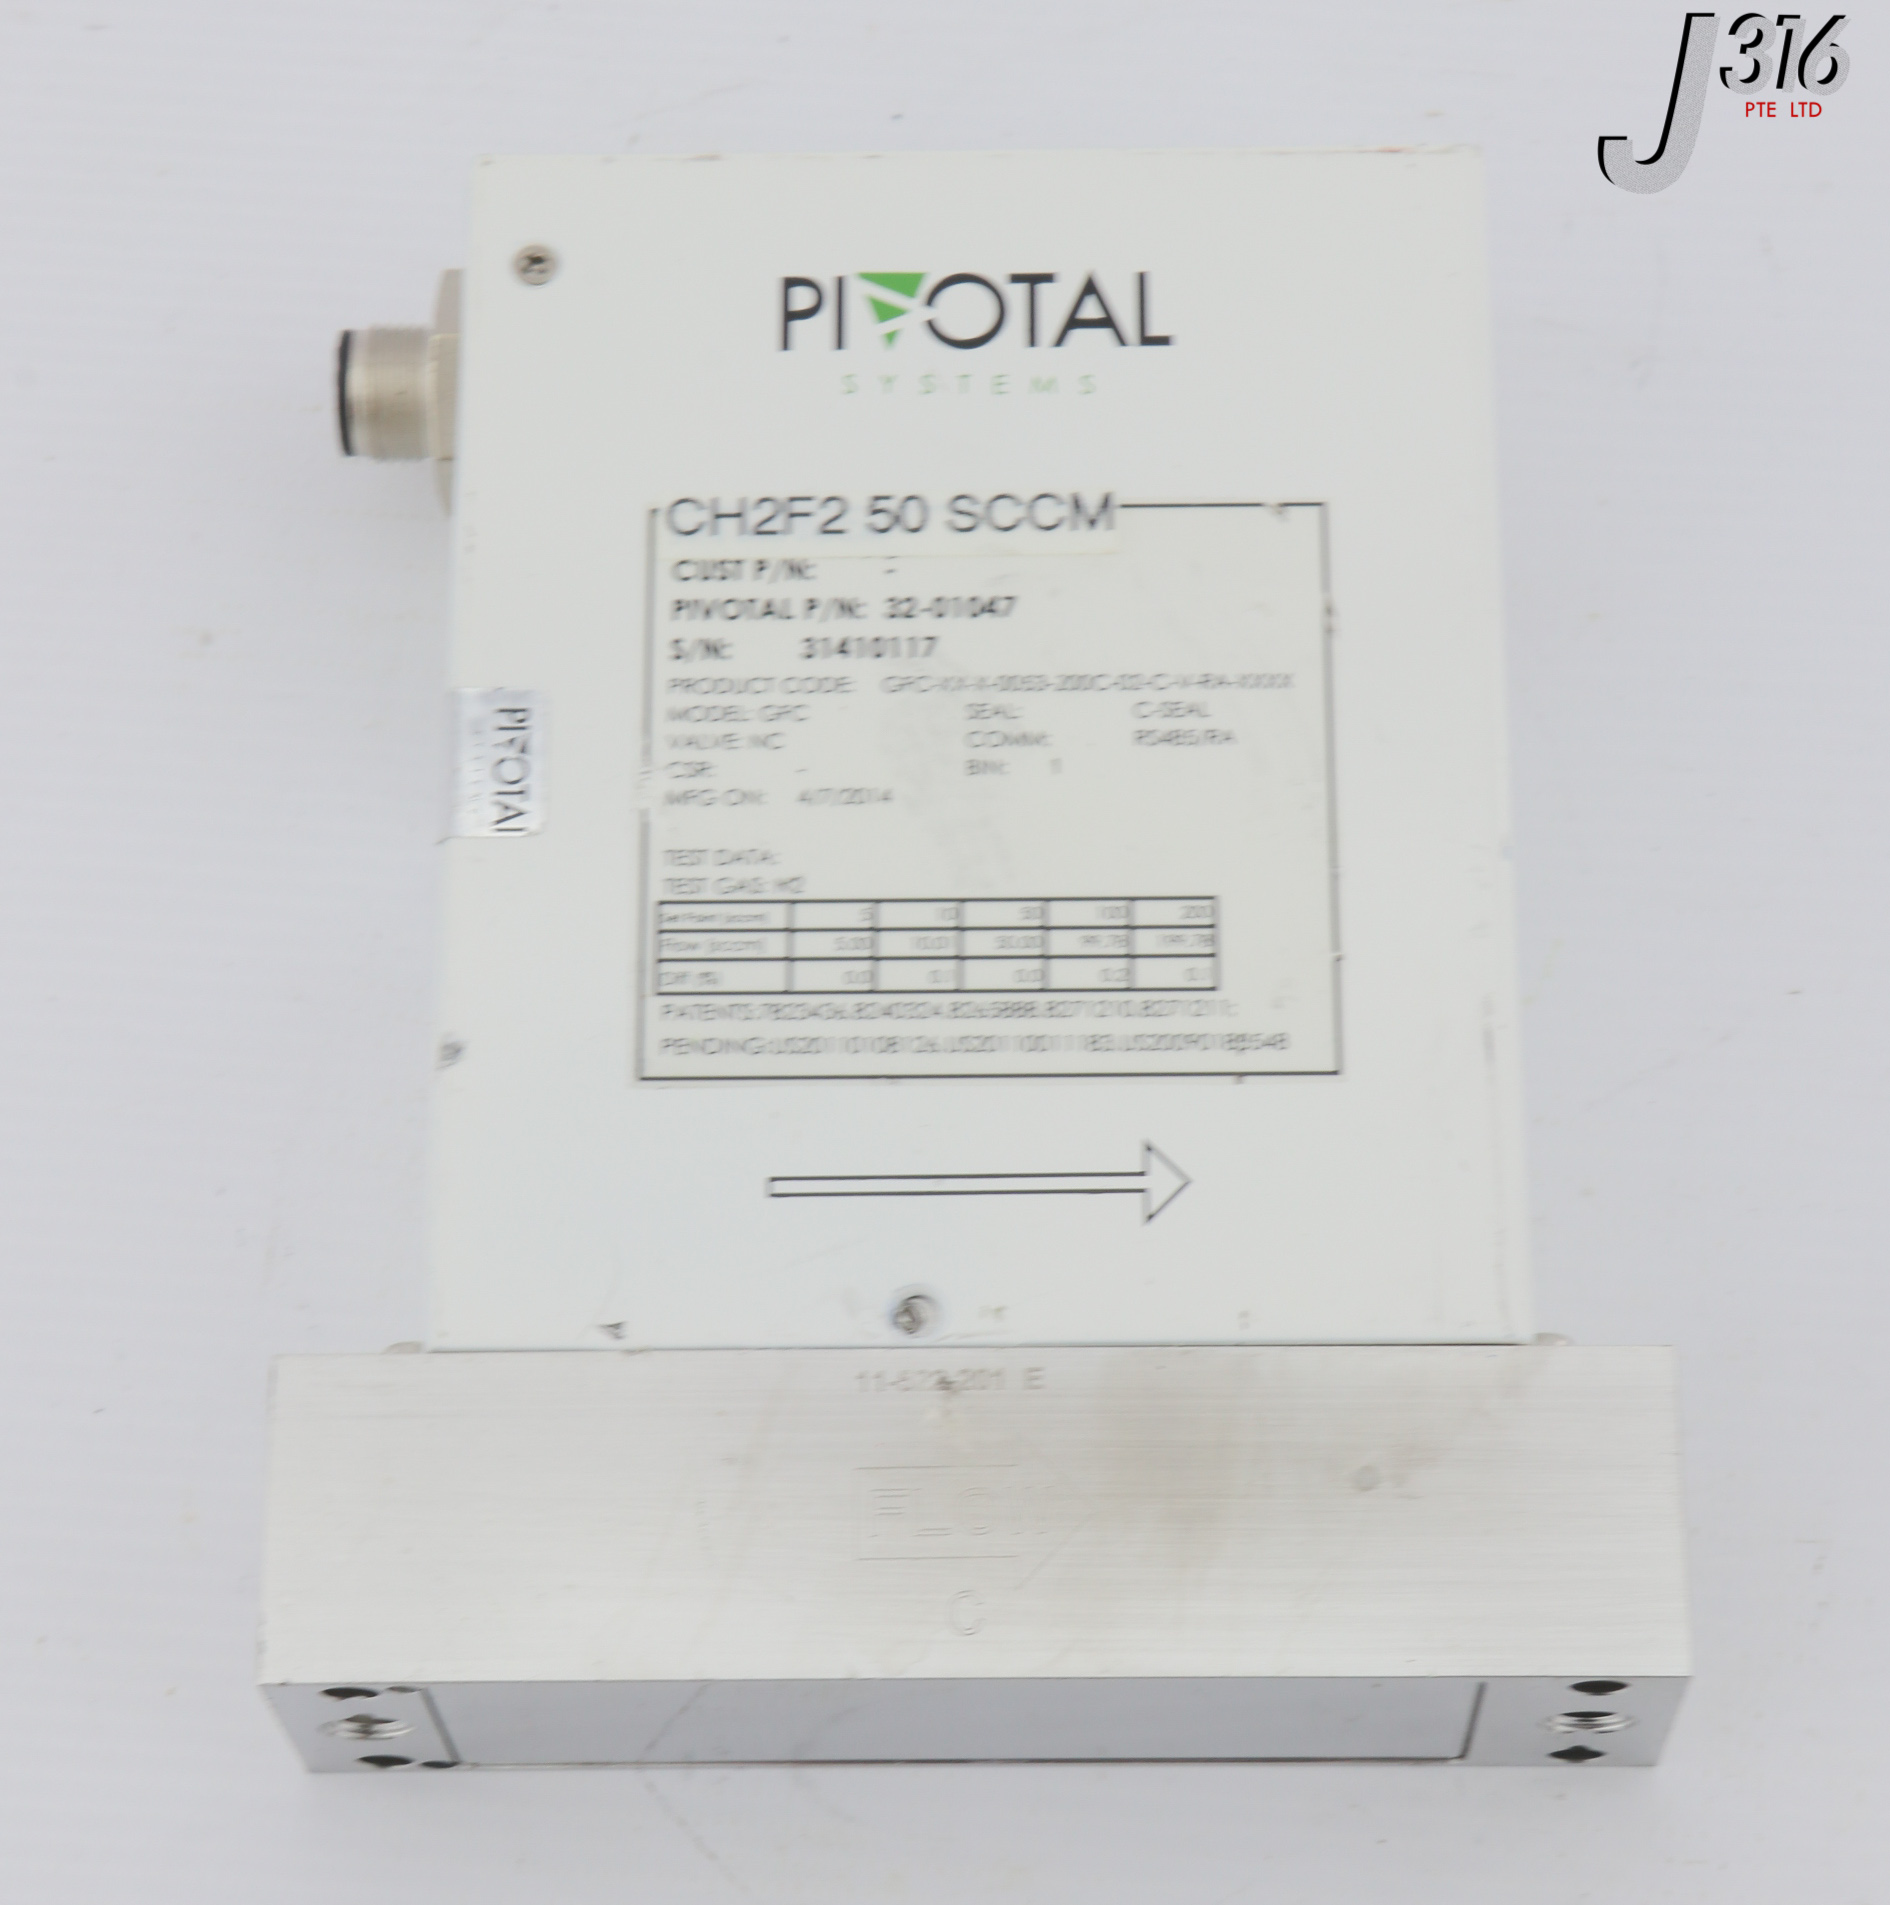 6753 PIVOTAL SYSTEMS GAS FLOW CONTROLLER 32-01047 J316Gallery